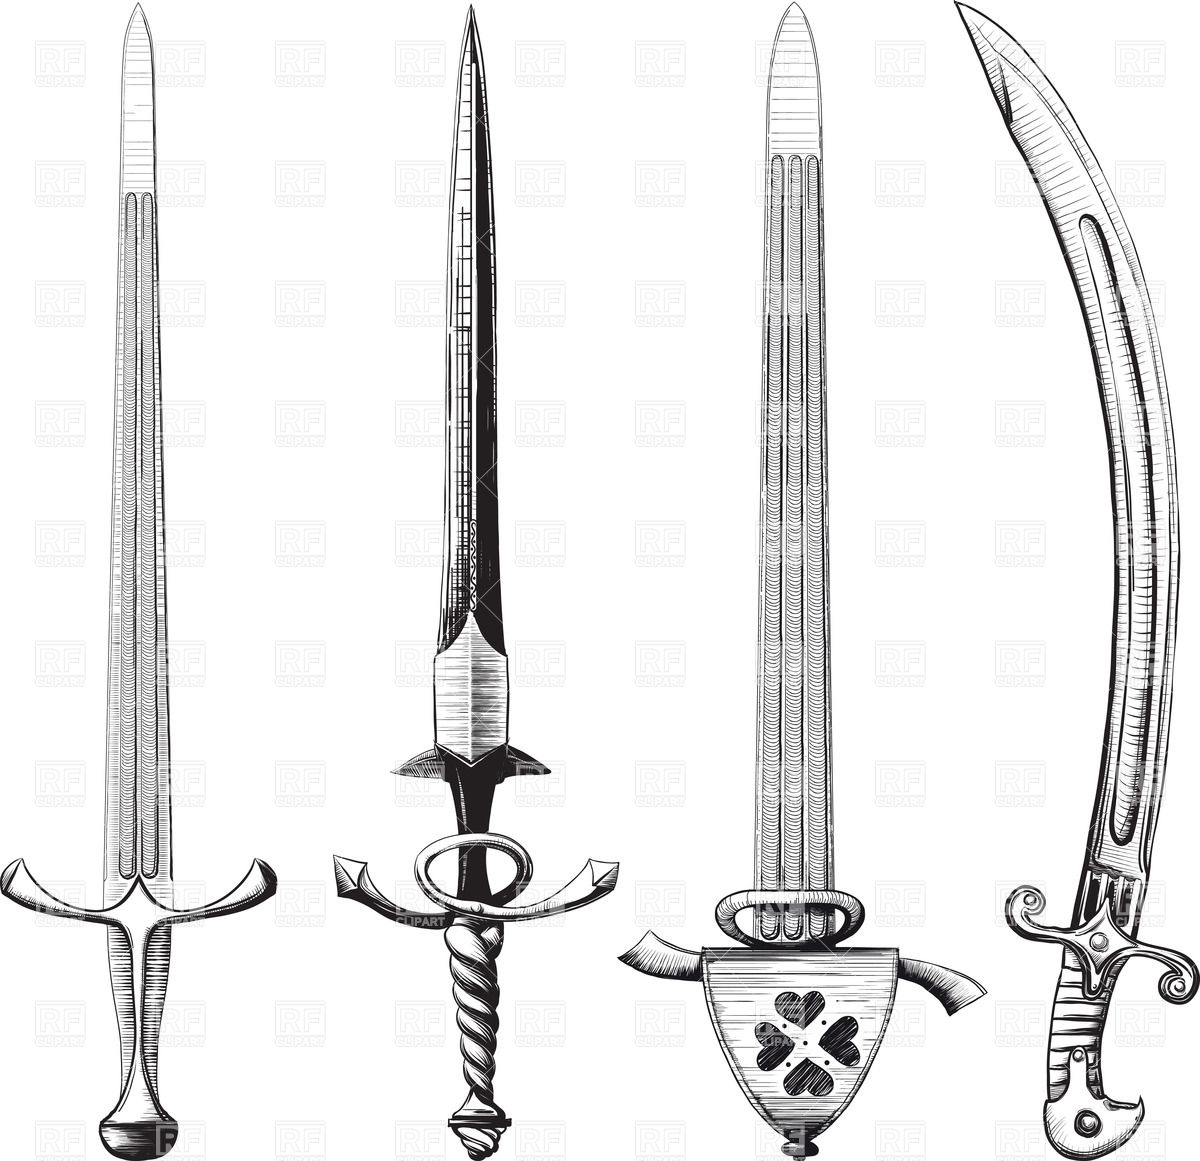 Ornate Medieval Swords And Sabers In Graphic Arts Style 25224    